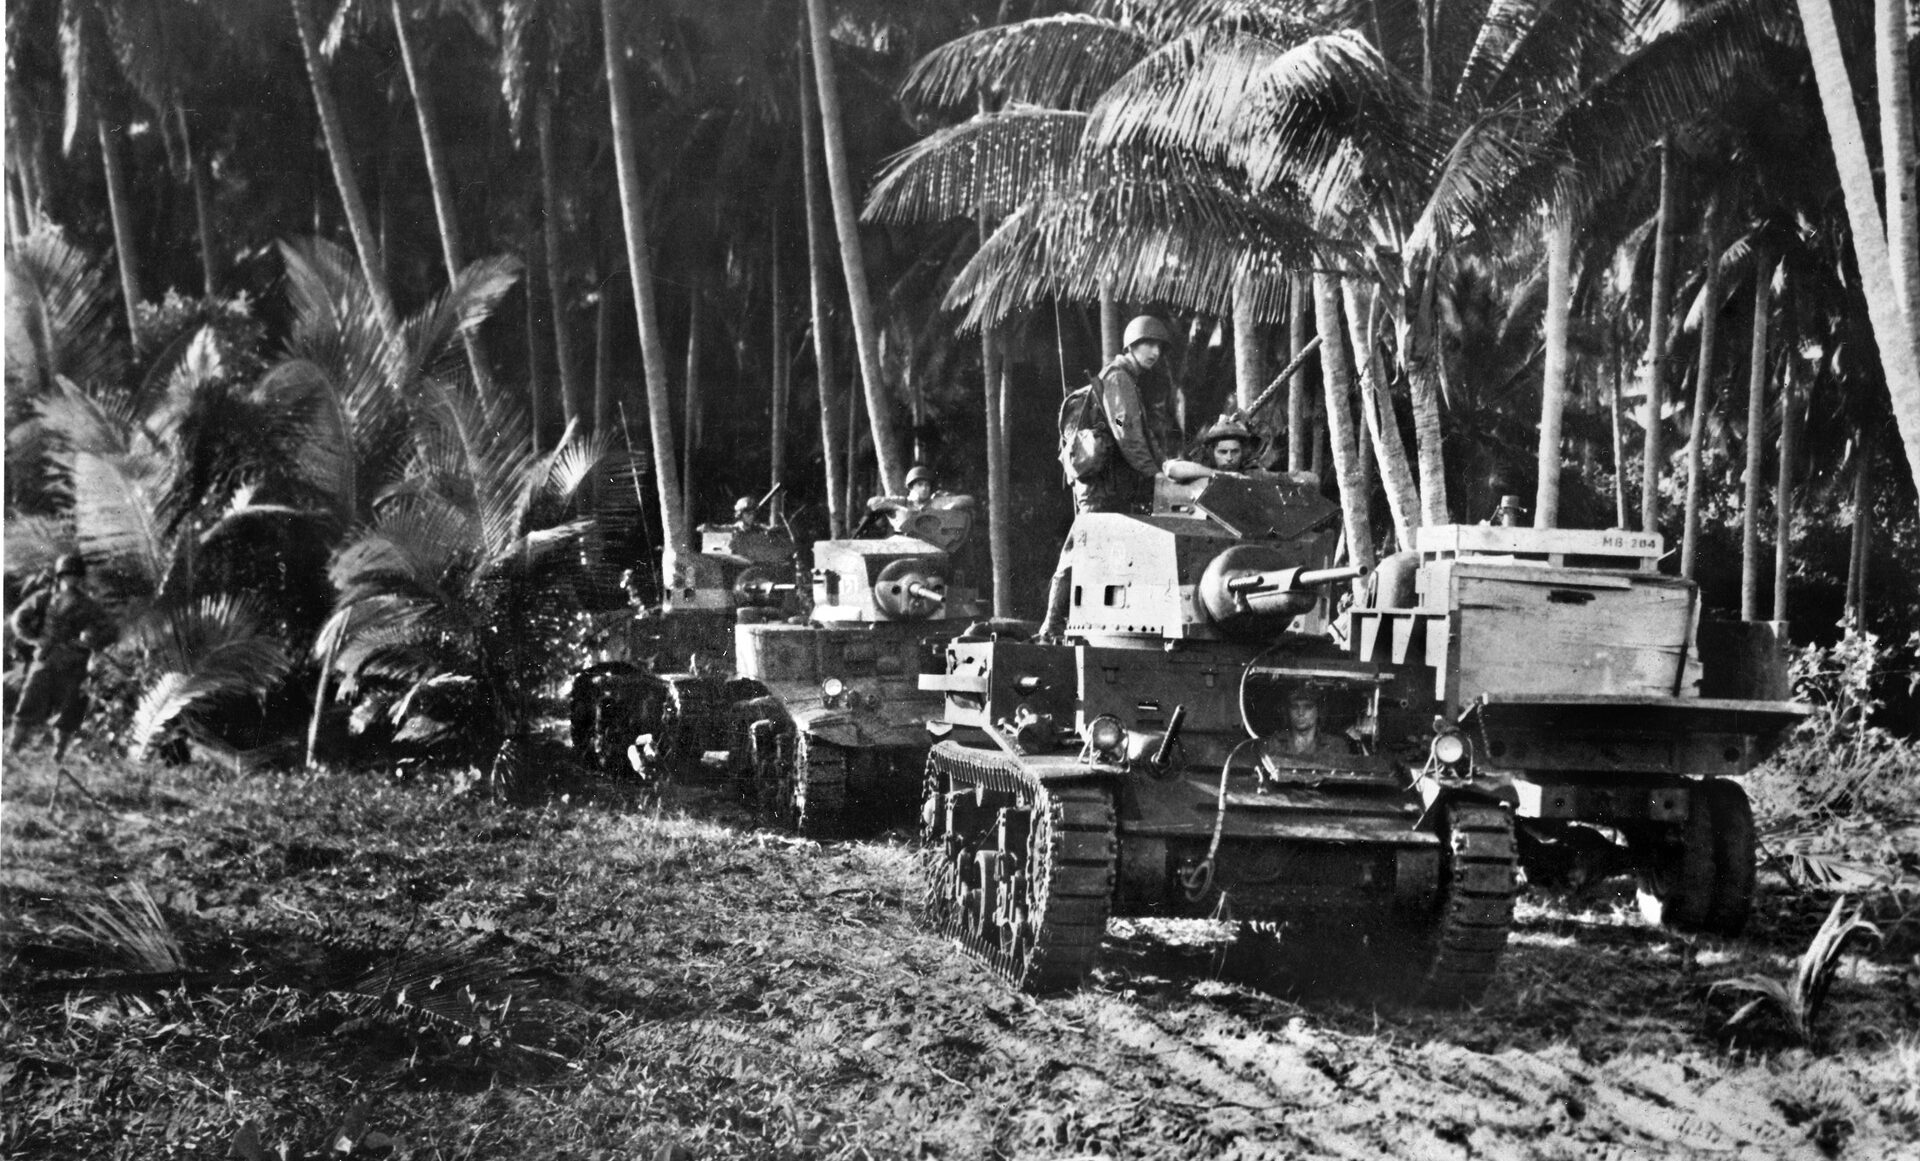 M3 Stuart light tanks move forward on Guadalcanal. Mounting a 37mm main weapon and .30-caliber machine guns, the Stuarts inflicted heavy losses on the attacking Japanese at the Battle of the Tenaru River. 